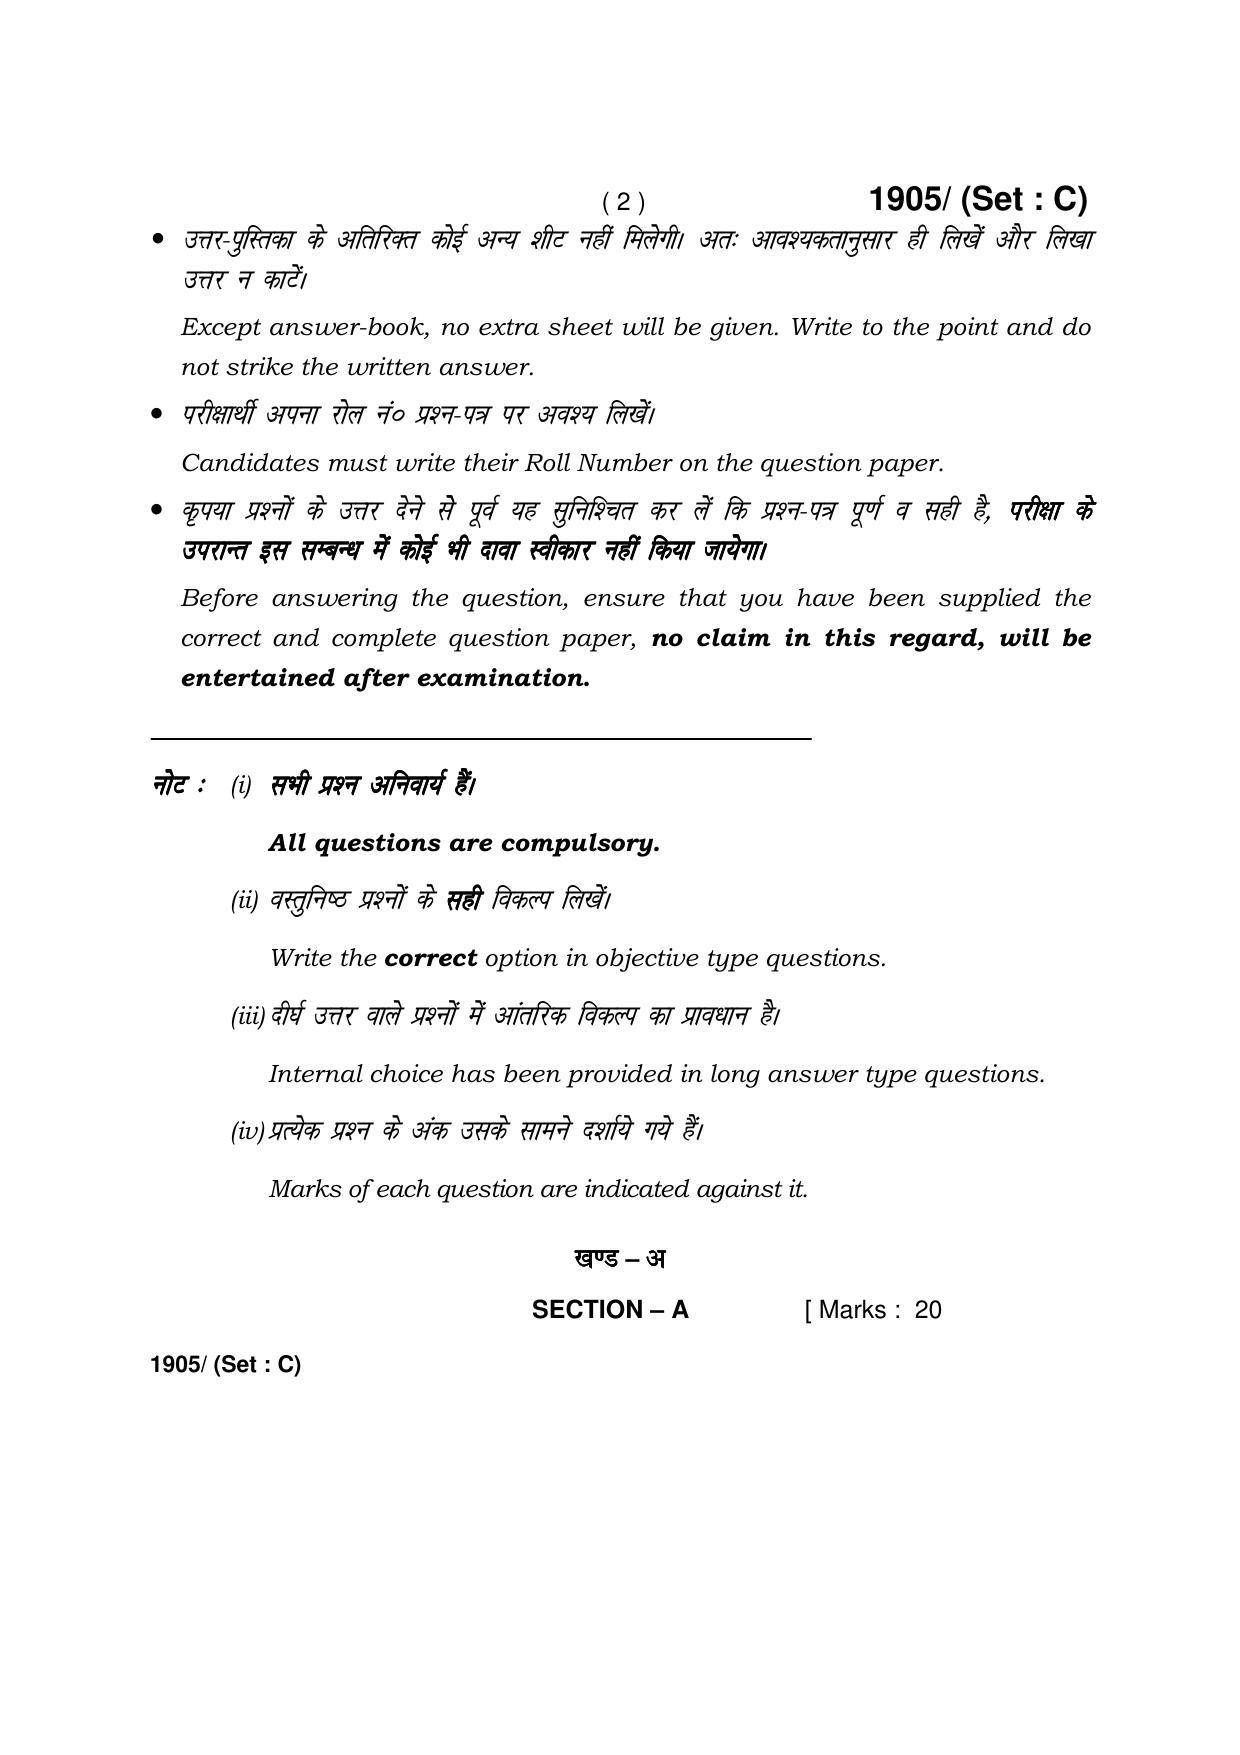 Haryana Board HBSE Class 10 Science -C 2017 Question Paper - Page 2